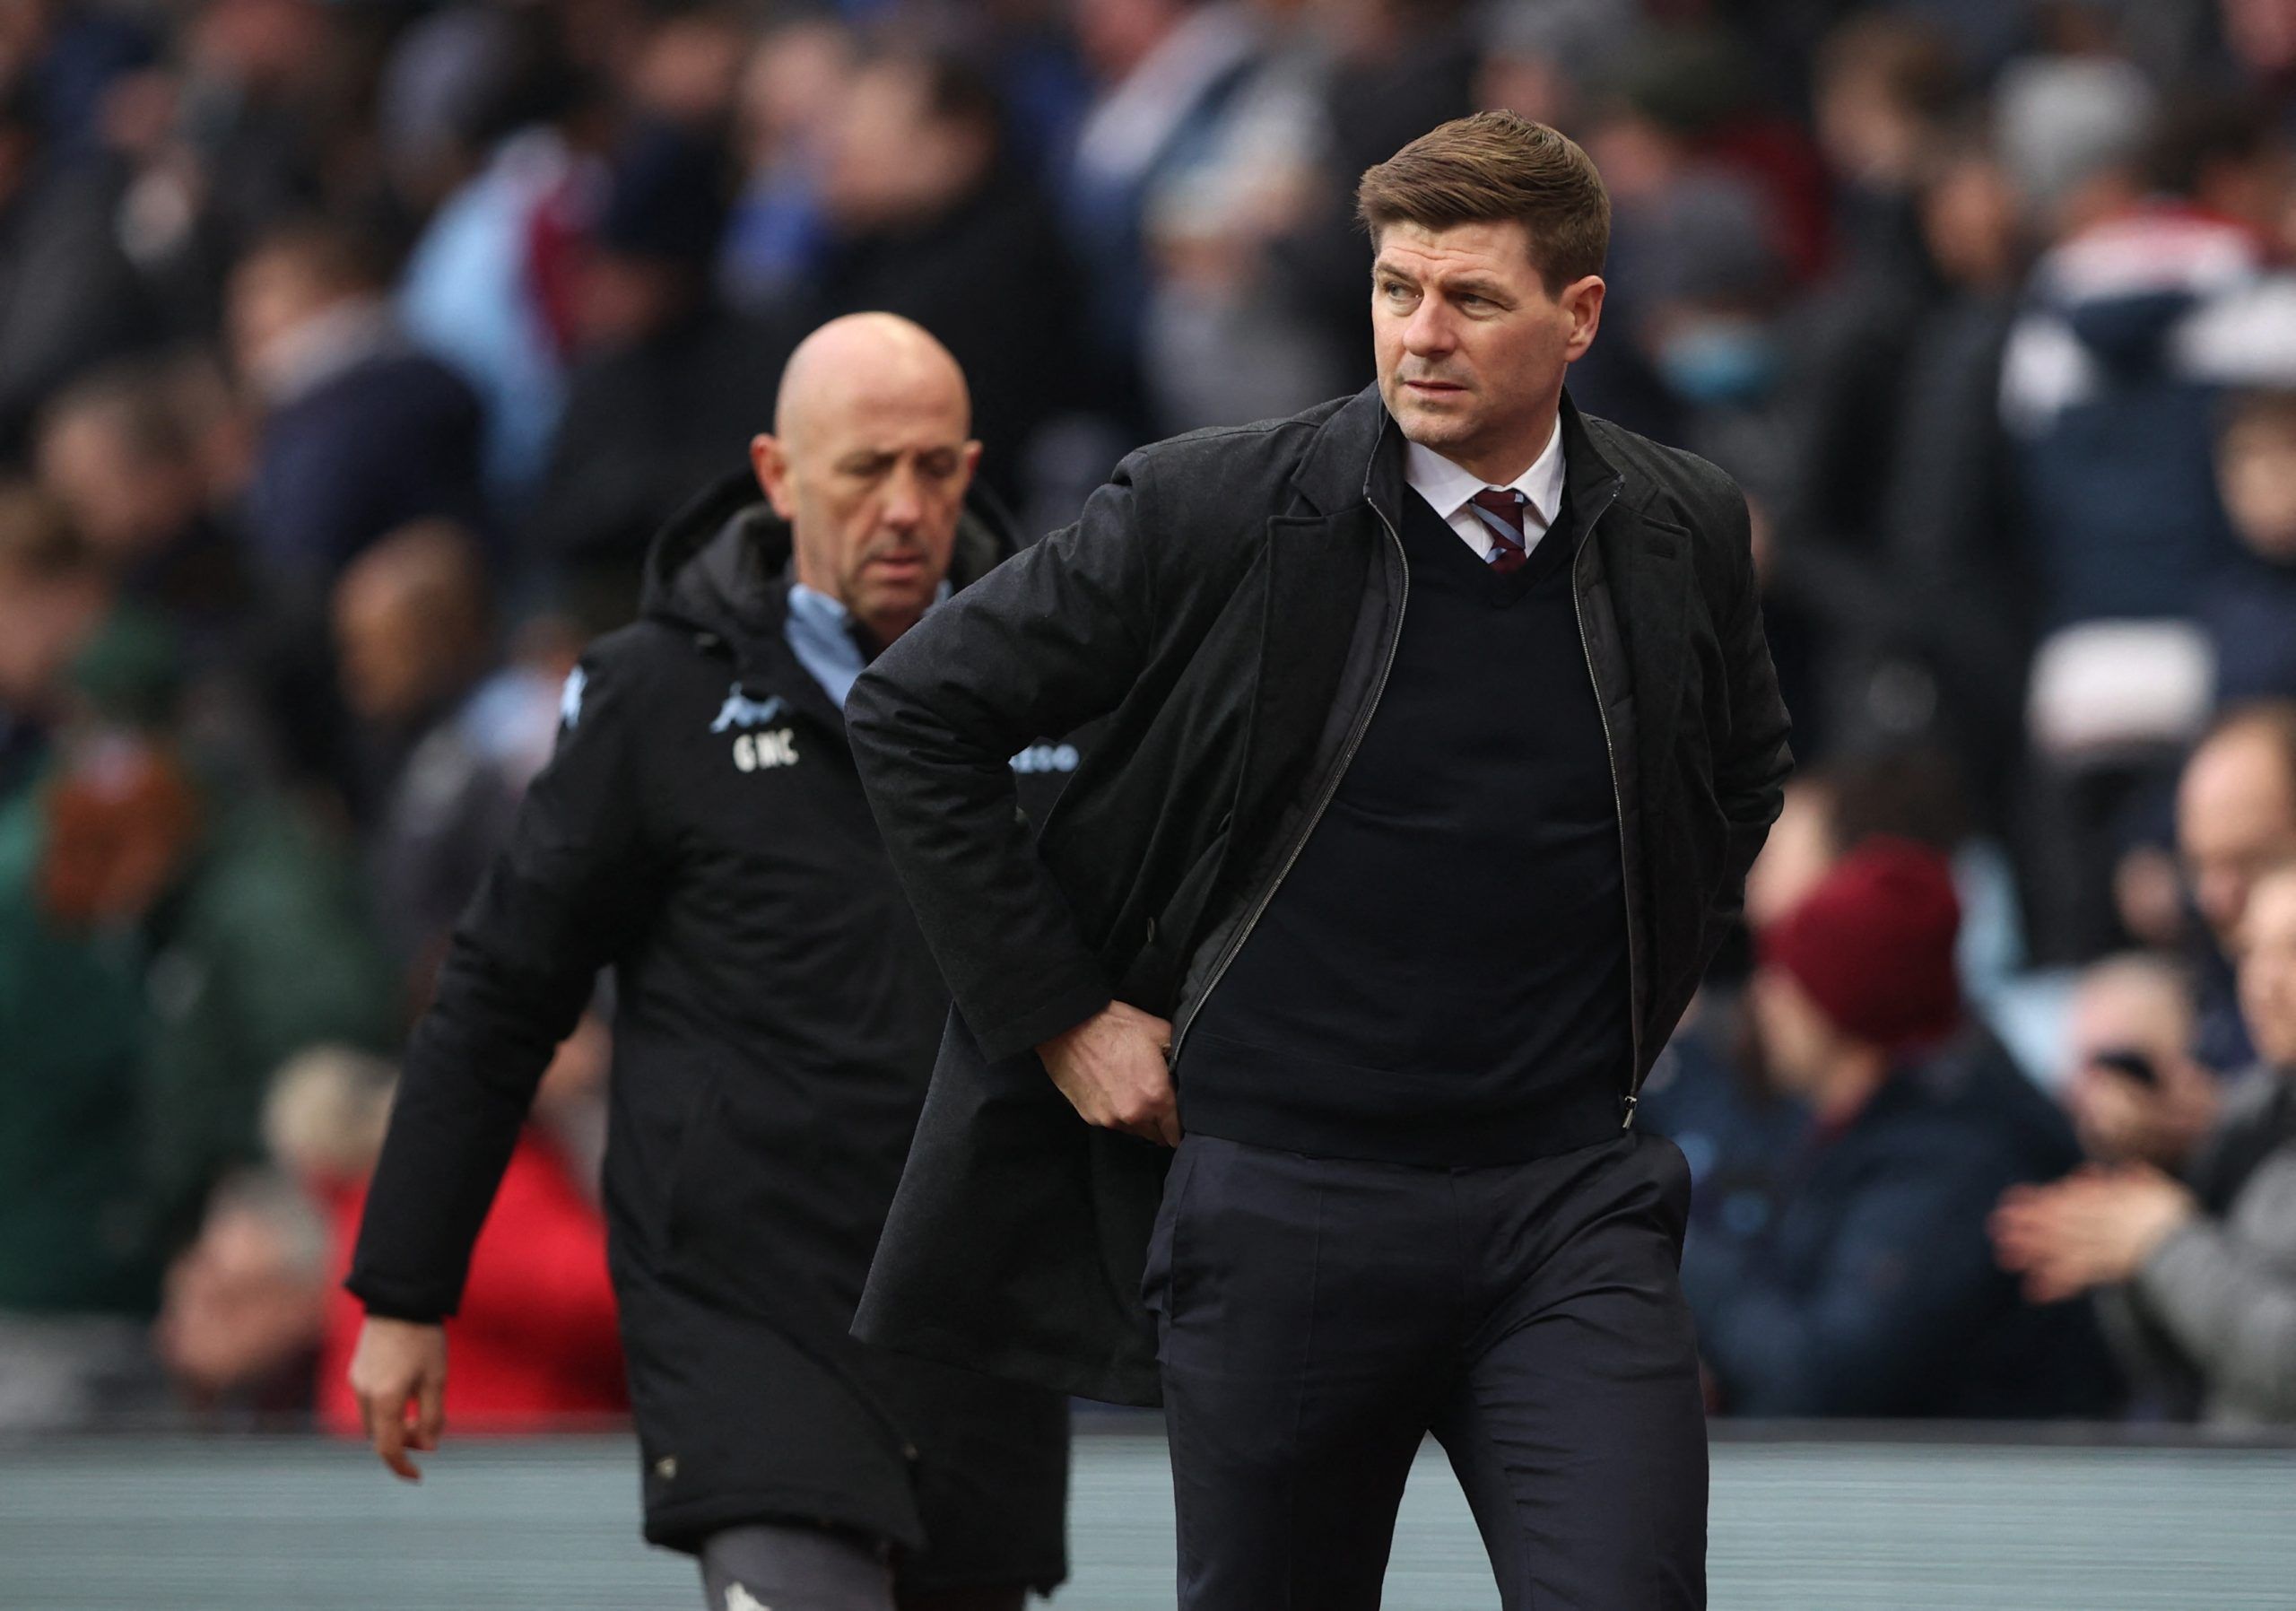 Soccer Football - Premier League - Aston Villa v Watford - Villa Park, Birmingham, Britain - February 19, 2022 Aston Villa manager Steven Gerrard at half time Action Images via Reuters/Molly Darlington EDITORIAL USE ONLY. No use with unauthorized audio, video, data, fixture lists, club/league logos or 'live' services. Online in-match use limited to 75 images, no video emulation. No use in betting, games or single club /league/player publications.  Please contact your account representative for f